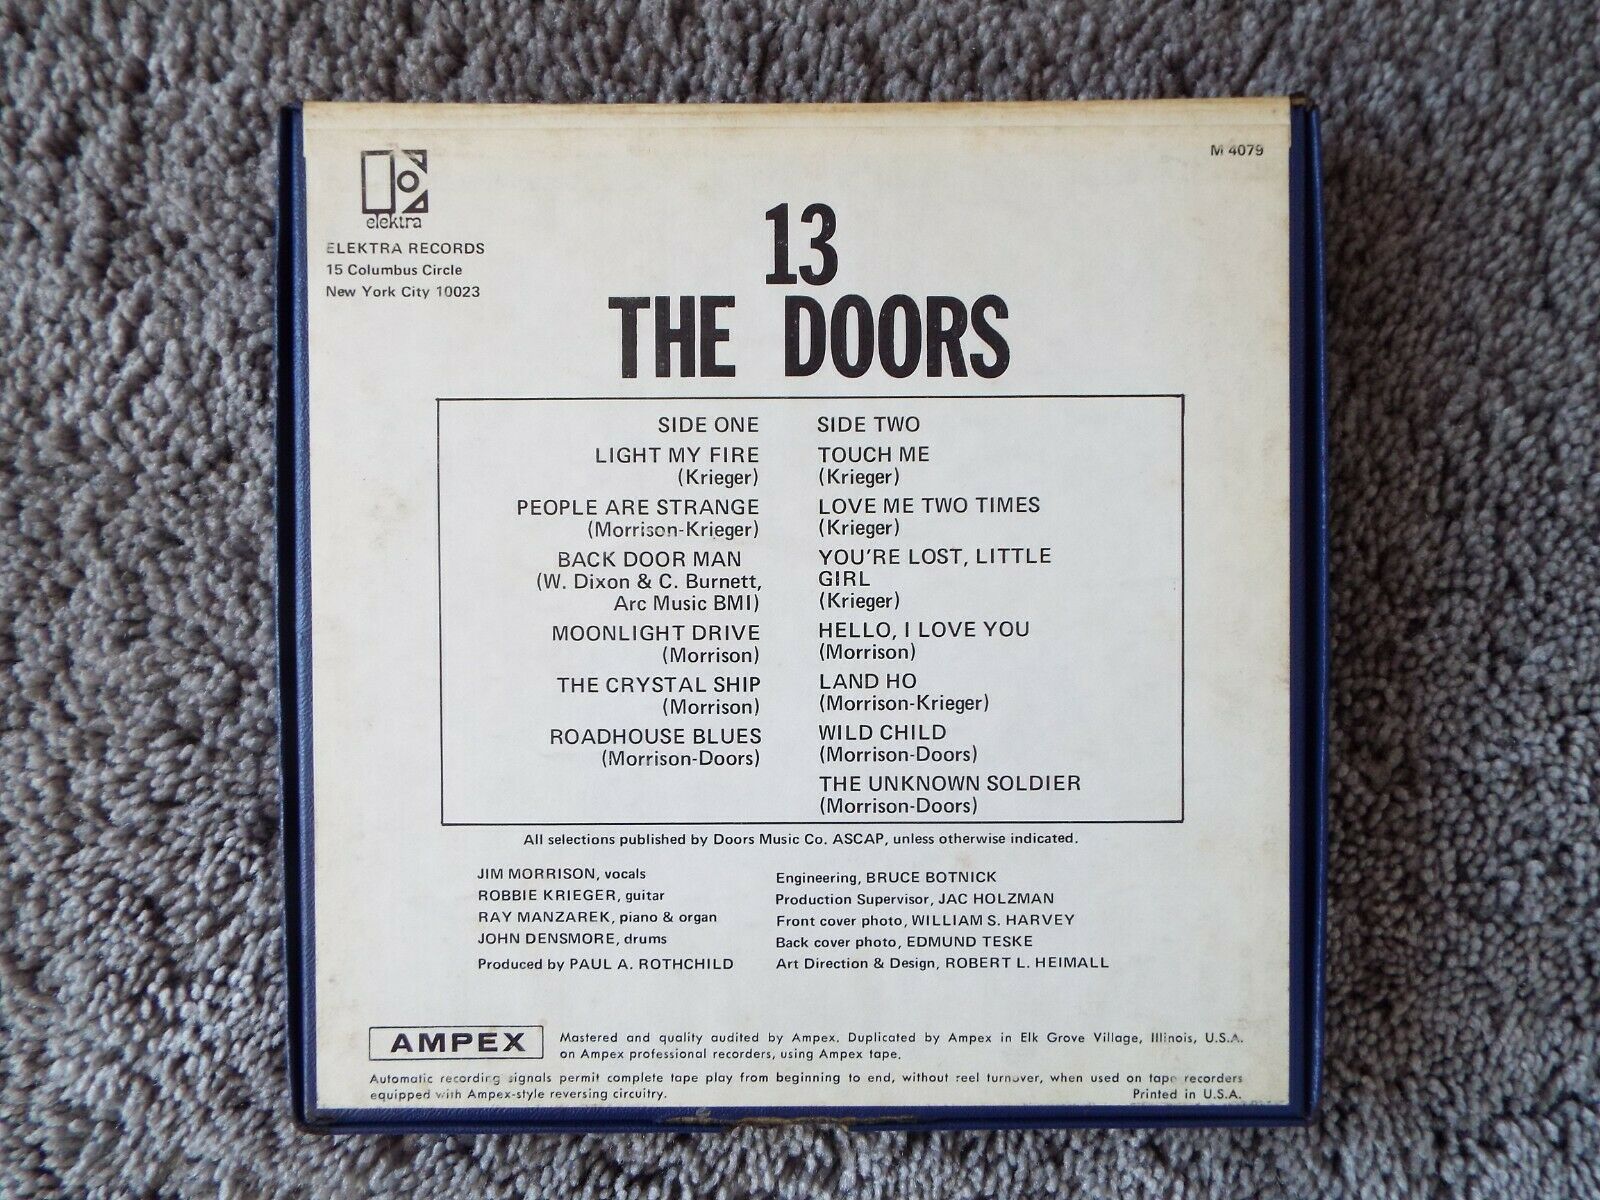  RARE-THE DOORS-JIM MORRISON-13-REEL TO REEL TAPE 4 TRACK 7 1/2  IPS STEREO-AMPEX - auction details